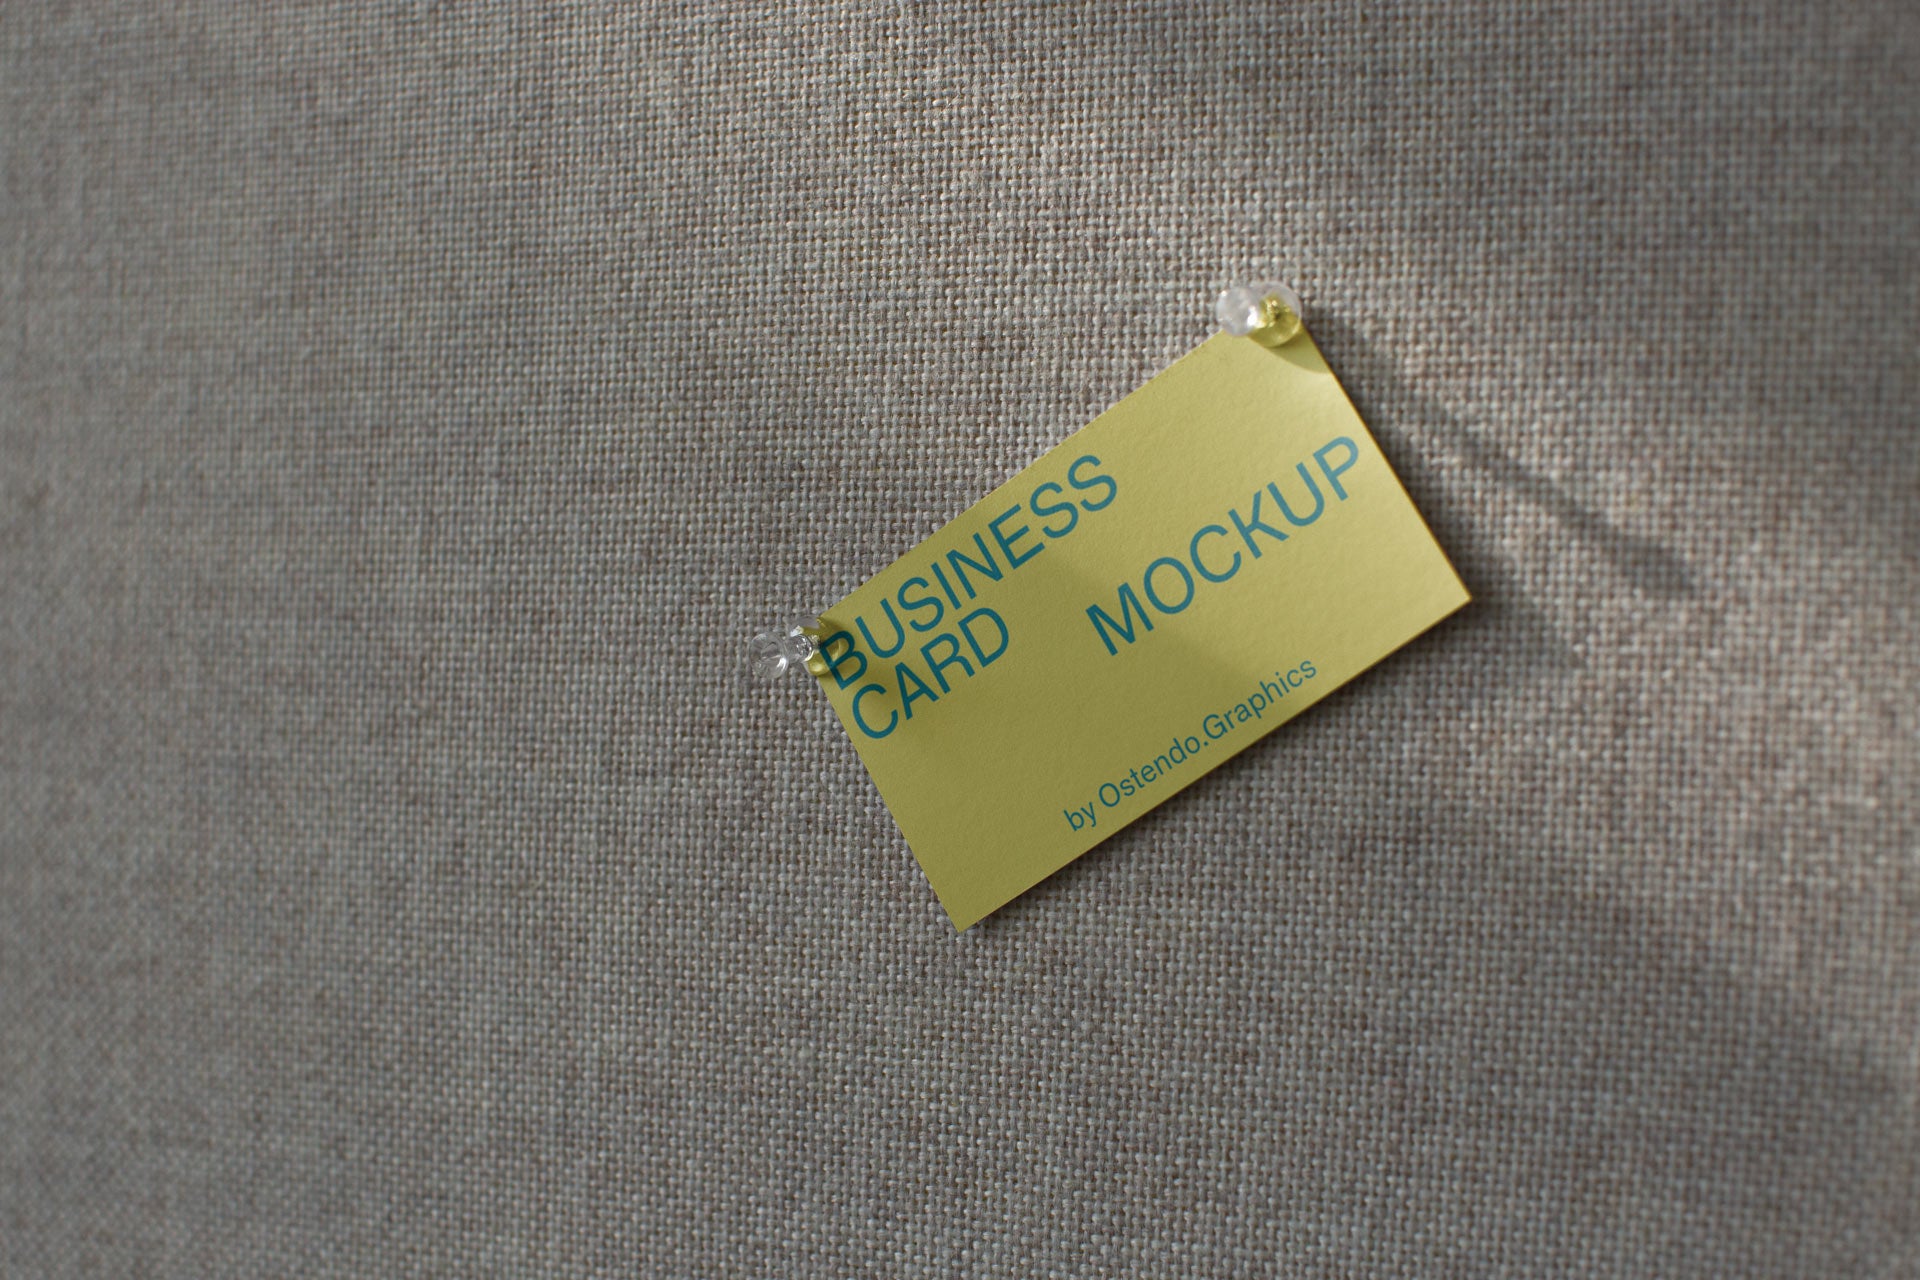 BC2 Business Card Mockup Pinned to a Board